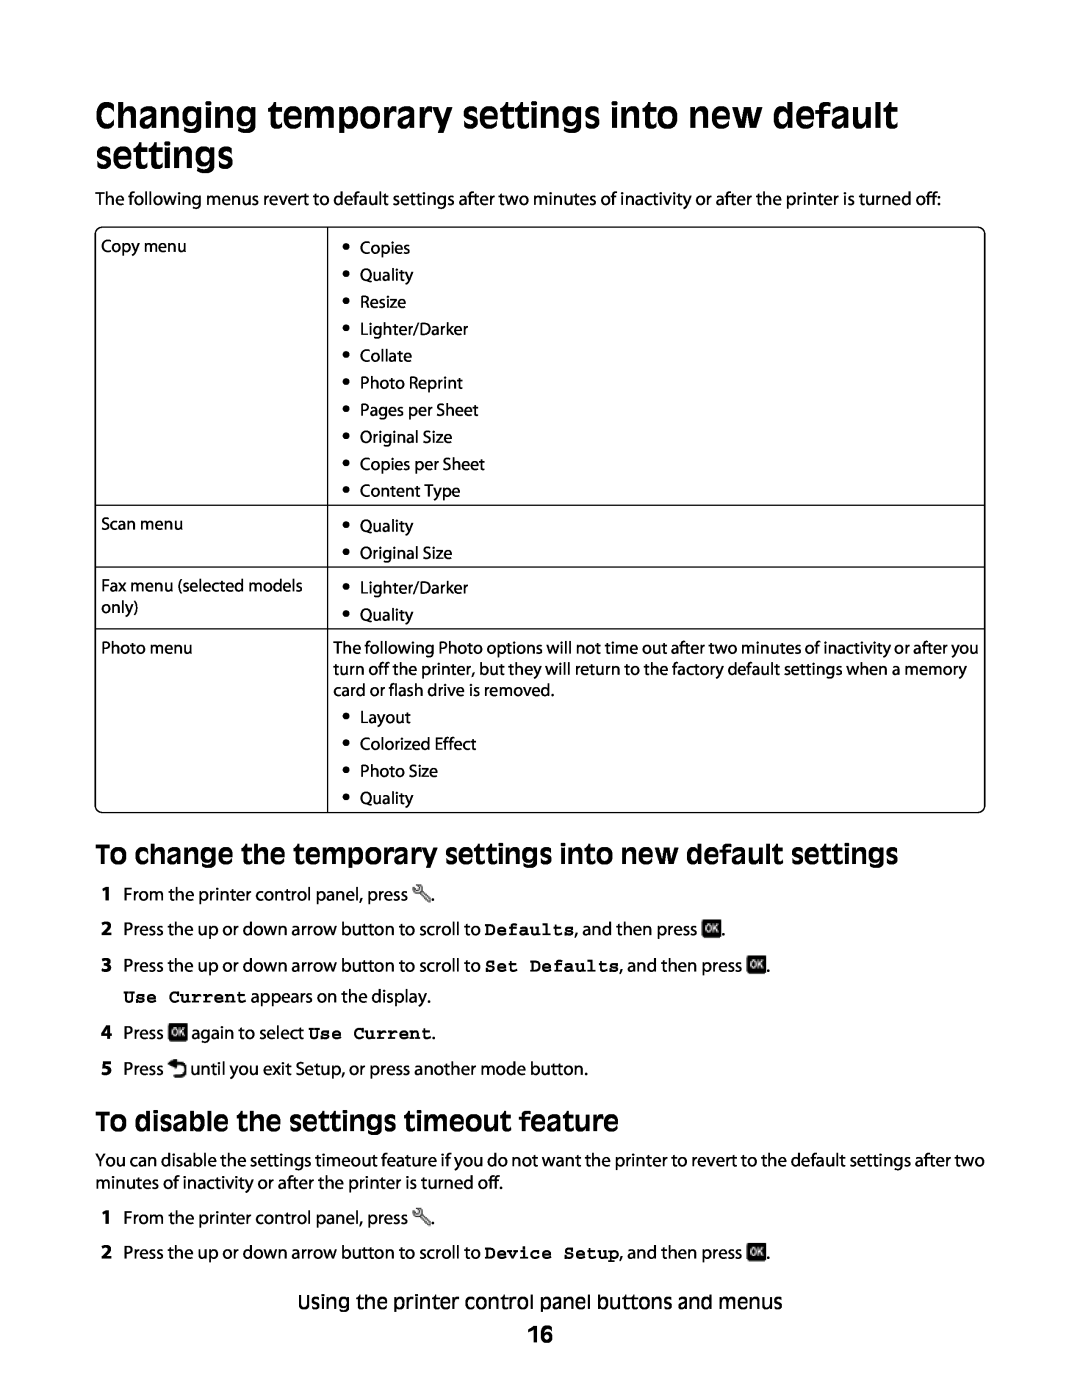 Lexmark 30E, S500, 301 manual Changing temporary settings into new default settings, To disable the settings timeout feature 